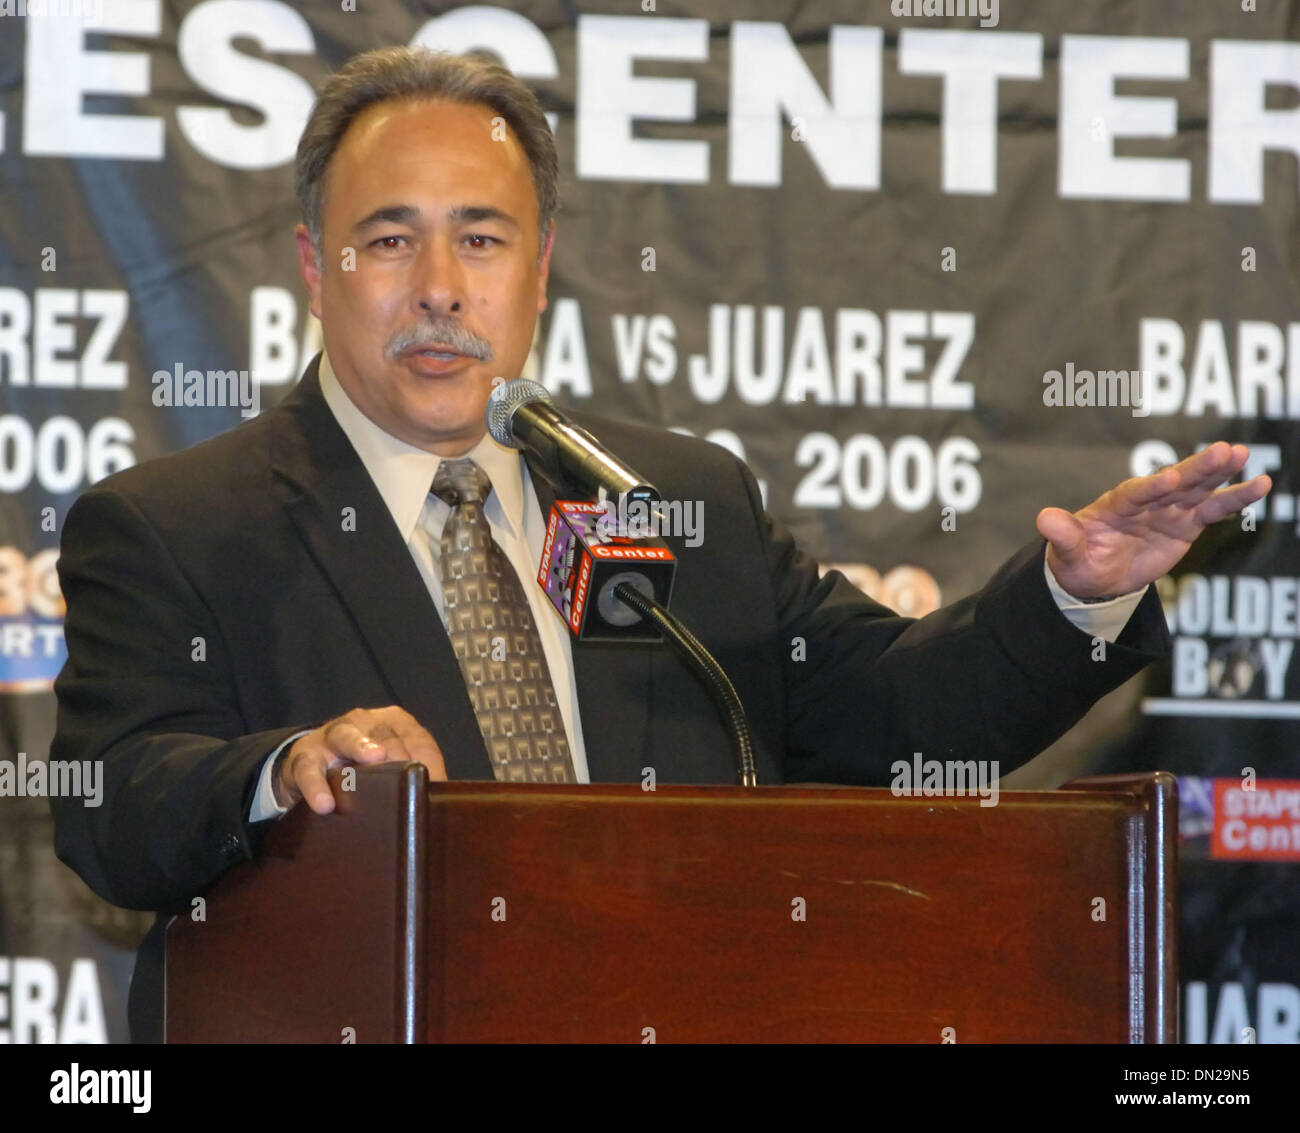 May 20, 2006; Los Angeles, CA, USA; California Boxing comissioner ARMANDO GARCIA explains how Marco Antonio Barrera narrowly defeats Rocky Juarez by split decision to retain his WBC super Featherweight title. In an unusual turn of events, the bout was initially declared a draw to the crowd in attendance and to The HBO Telecast audience. Upon closer inspection, however, it was deter Stock Photo